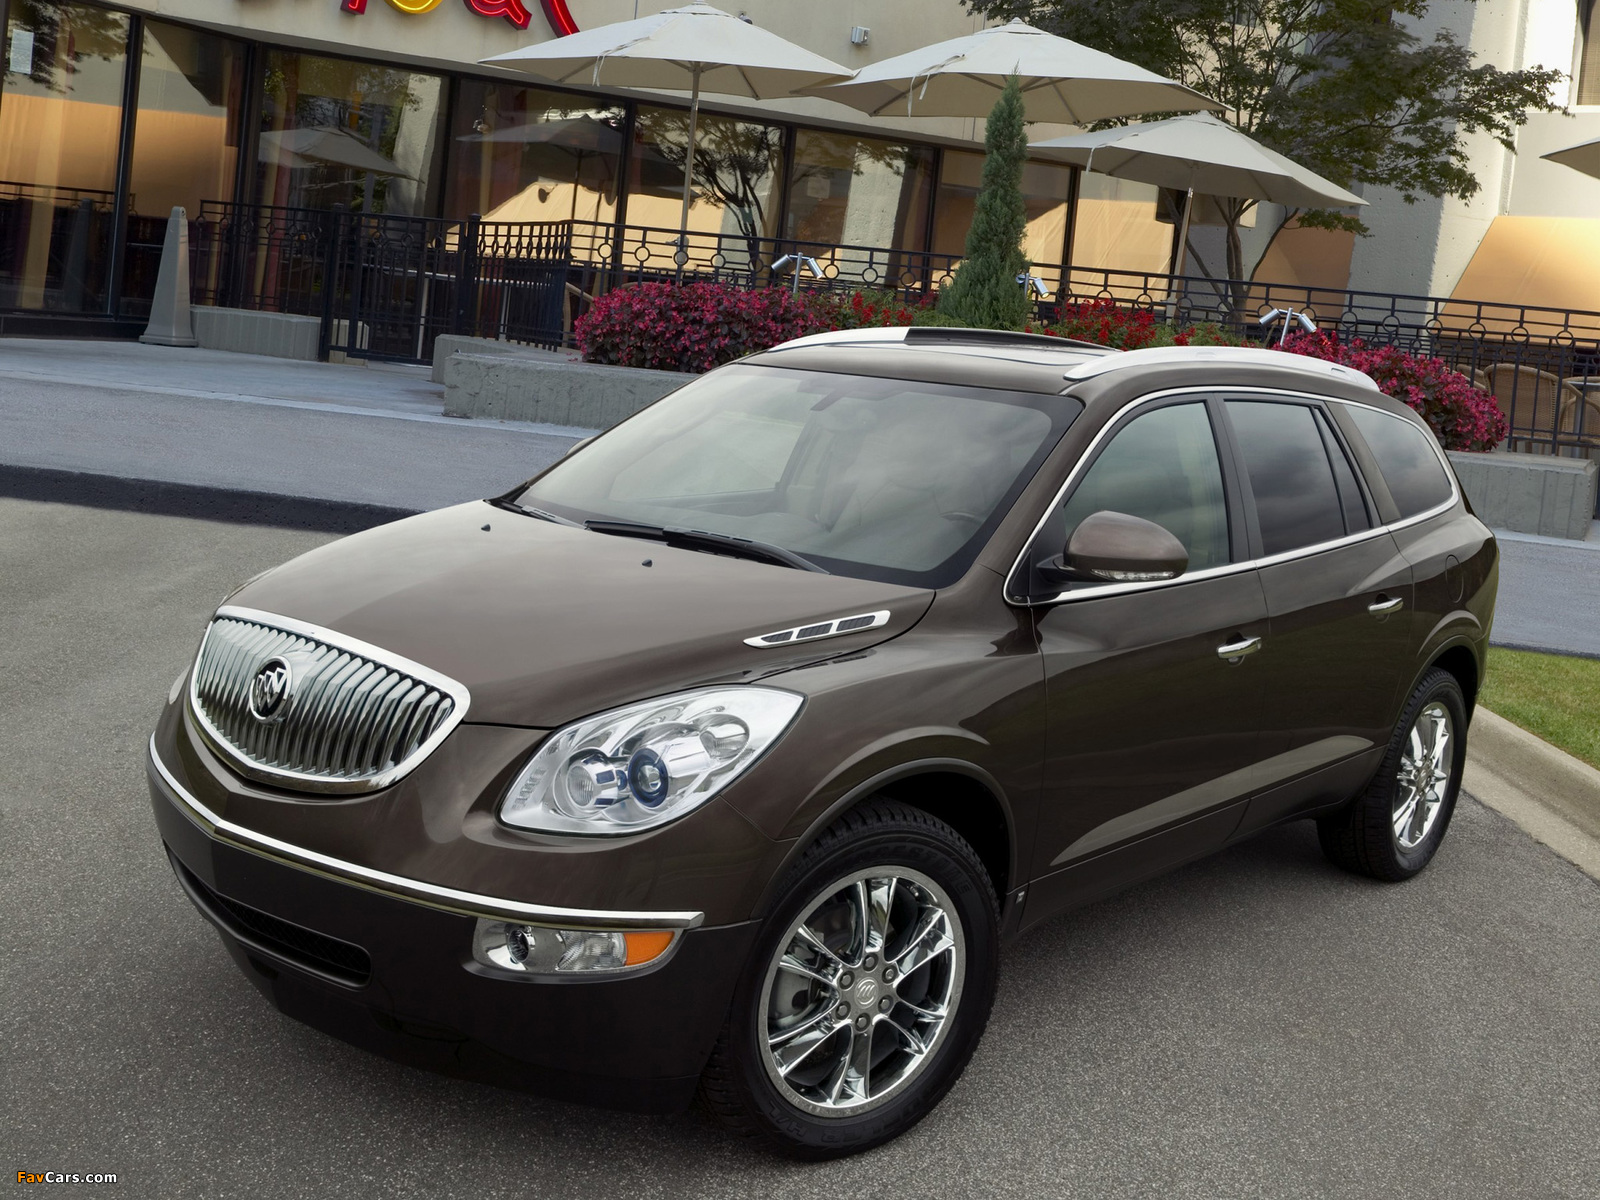 Buick Enclave 2007 pictures (1600 x 1200)